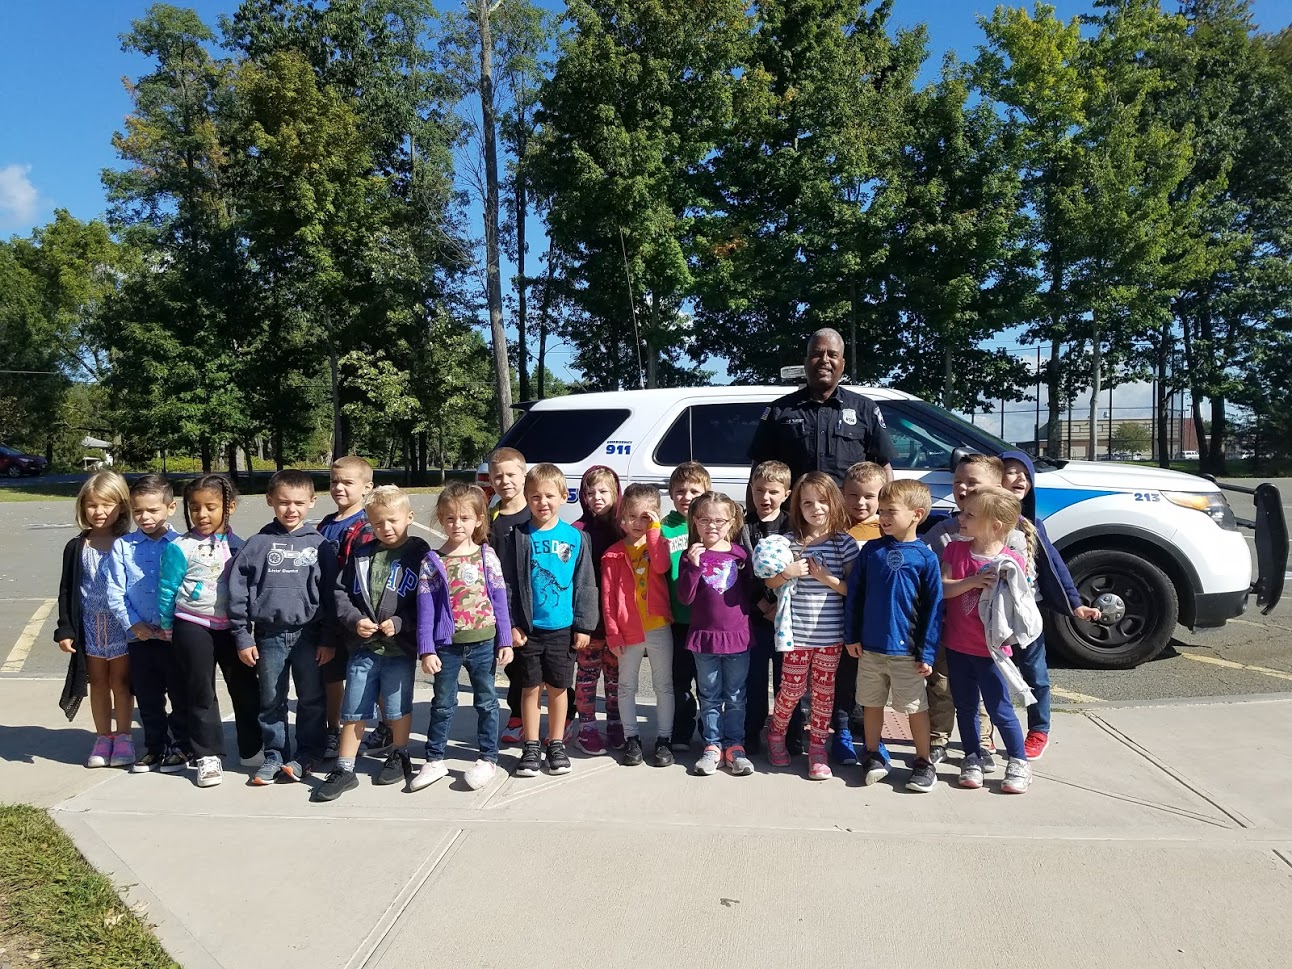 A police officer stands in front of his car with 20 kindergarten students